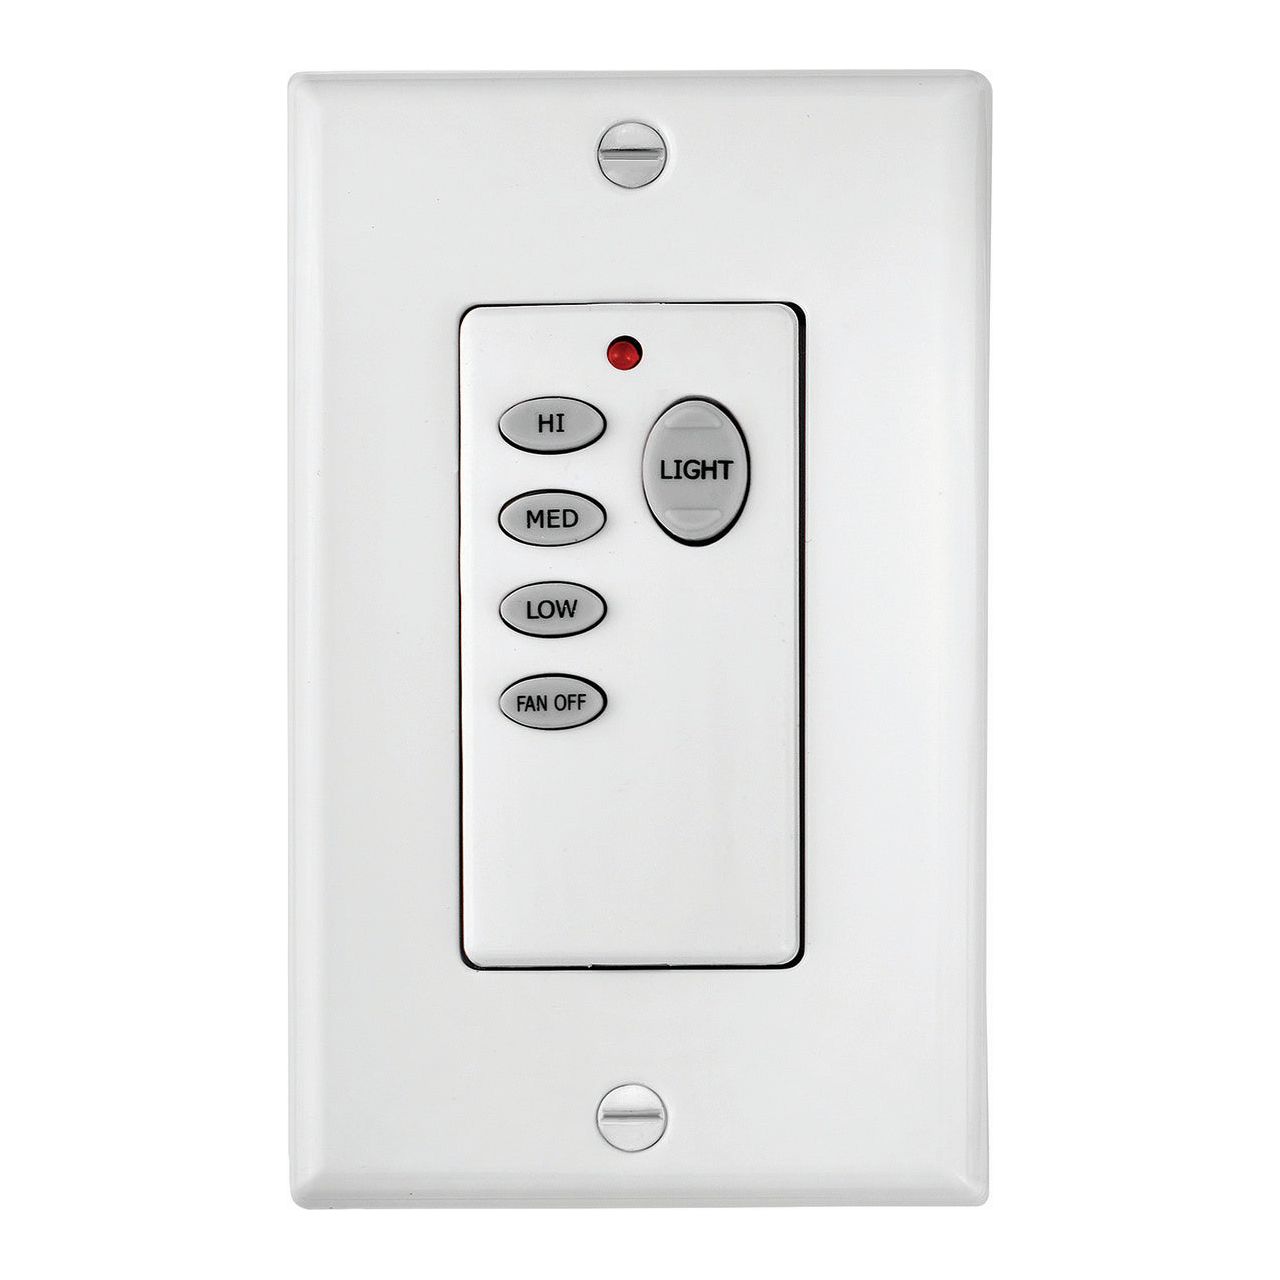 Hinkley Canada - 980040FWH - Universal Wall Control - Universal 3 Spd Wall Ctl - White